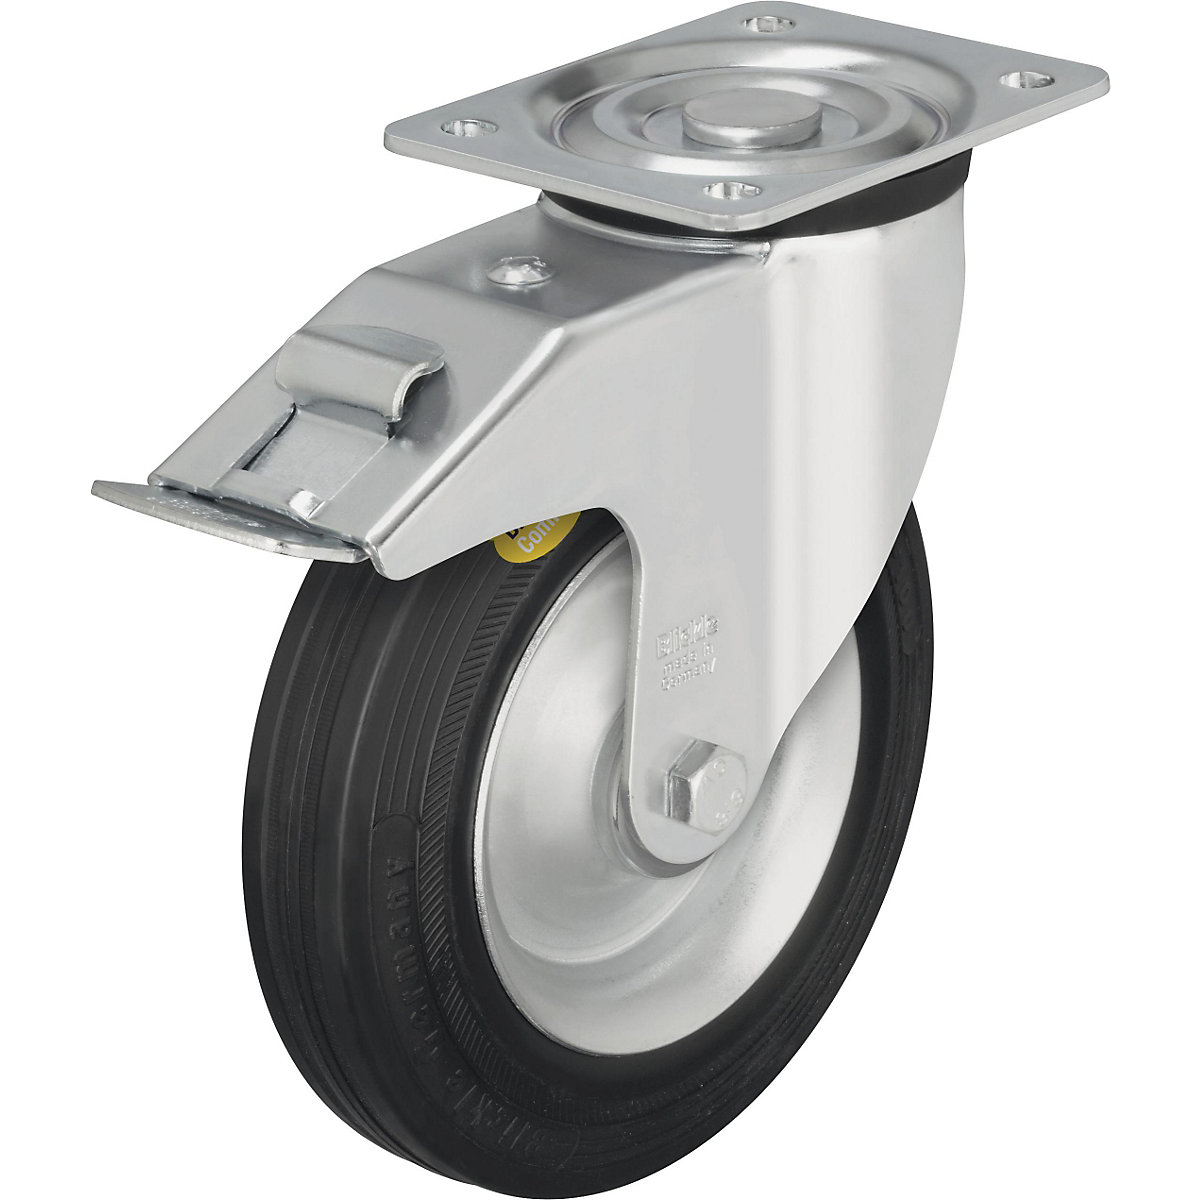 Two component solid rubber tyre, wheel Ø x width 140 x 37.5 mm, swivel castor with double stop-3